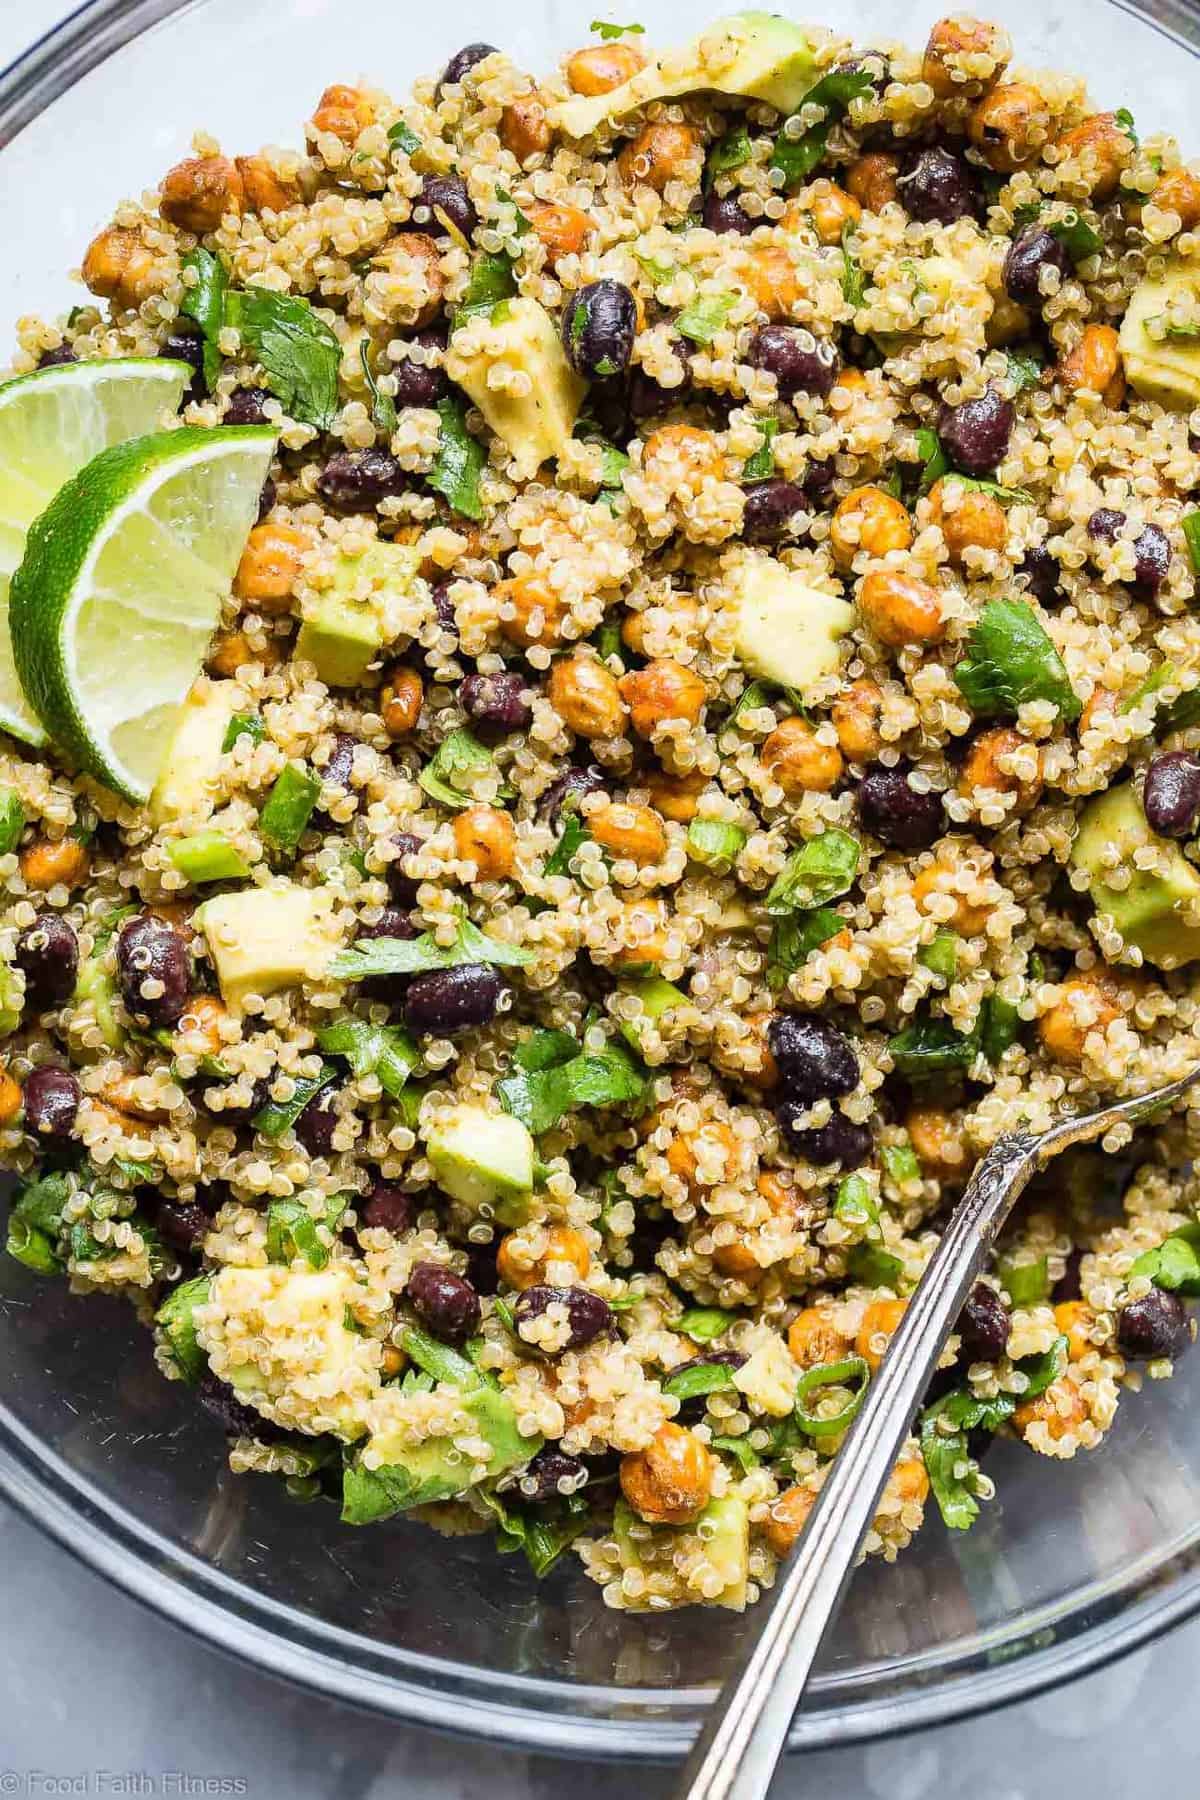 Mexican Quinoa Salad with Roasted Chickpeas  - This EASY quinoa salad is going to be your new favorite side or potluck recipe! It's healthy, gluten free, vegan friendly and CRAZY YUMMY! The Jalapeno lime dressing is EVERYTHING. | #Foodfaithfitness | #Vegan #Healthy #GlutenFree #Dairyfree #Quinoa